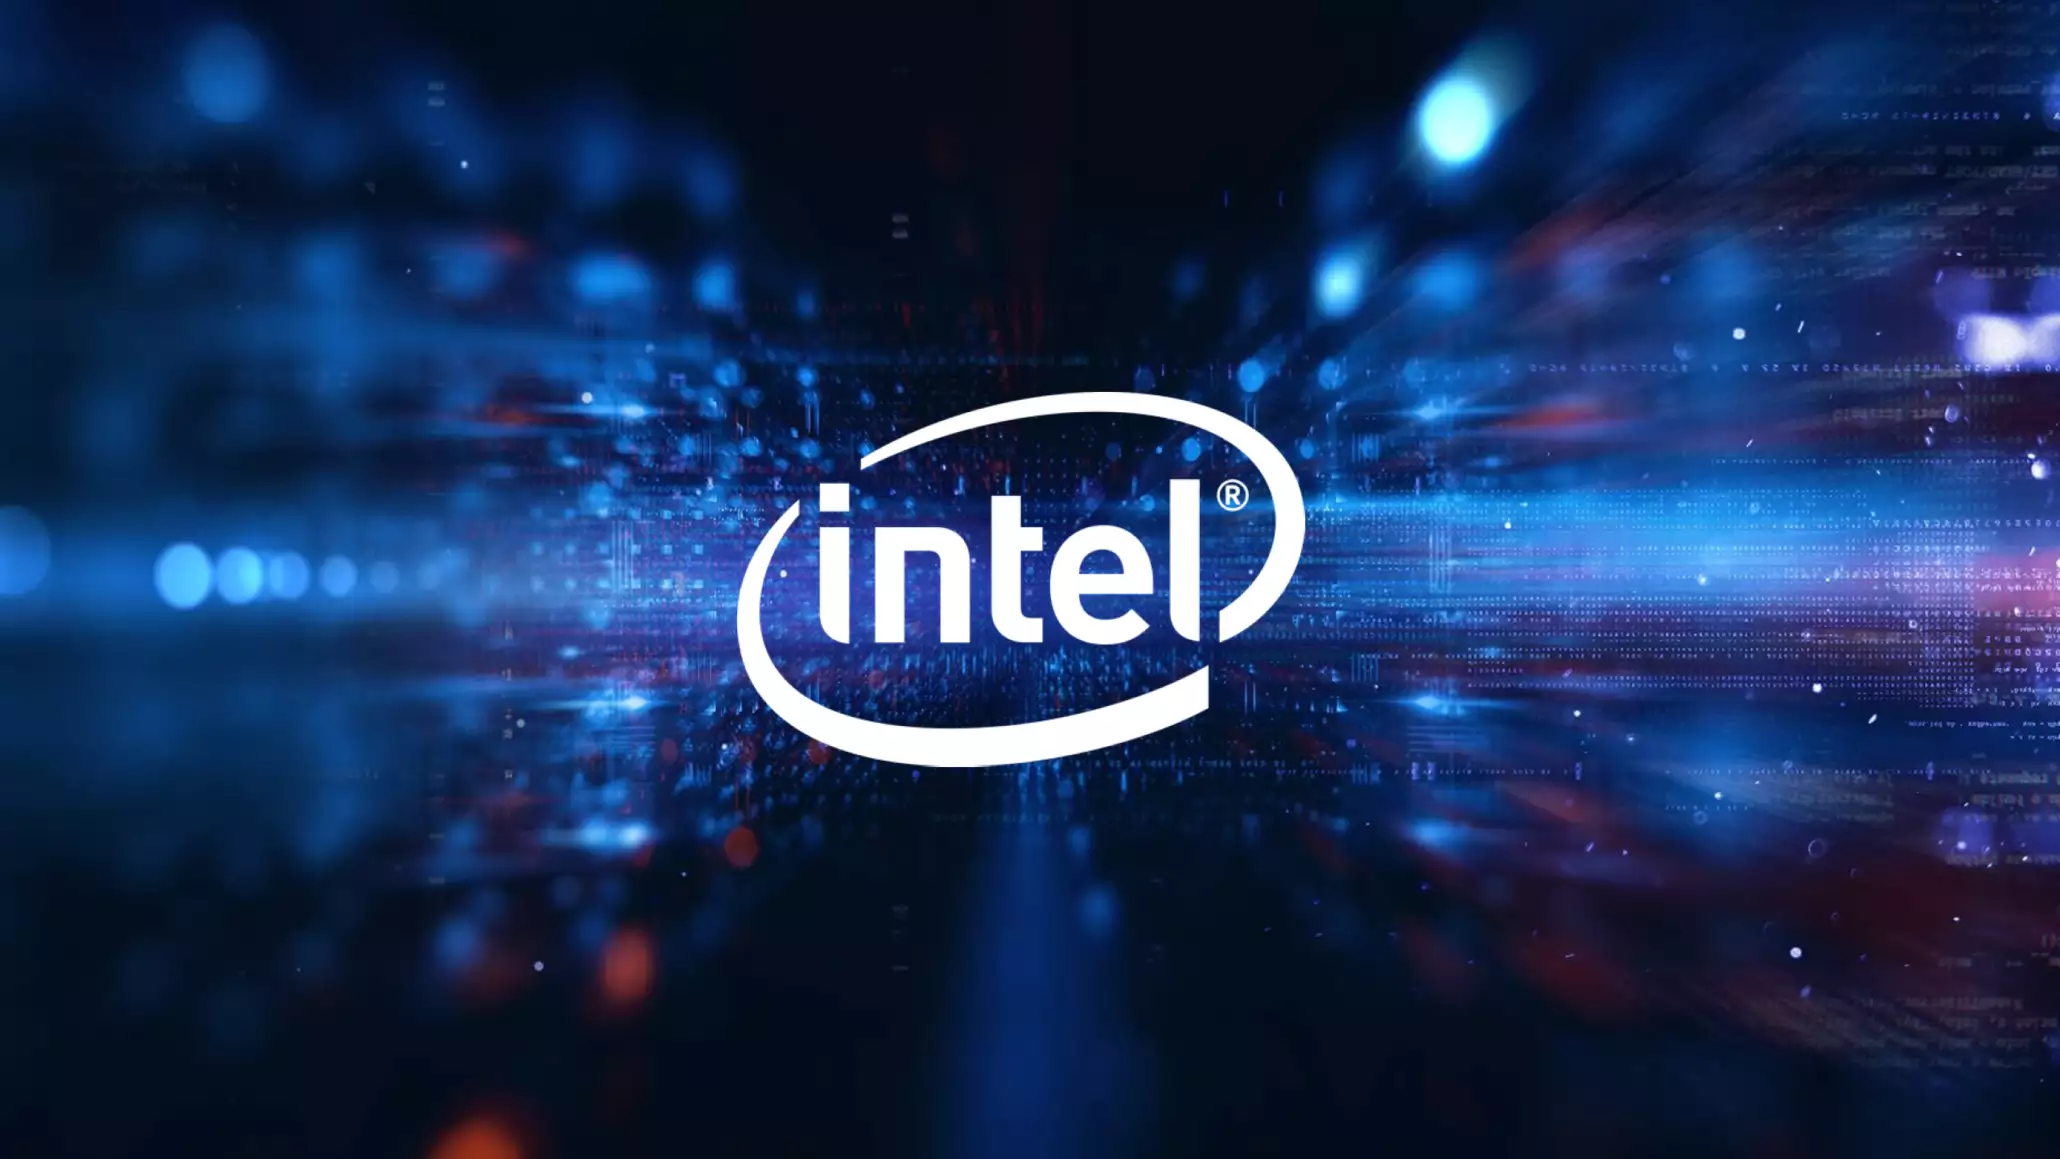 Intel on track for cumulative software sales of $1 billion by end 2027, executive says